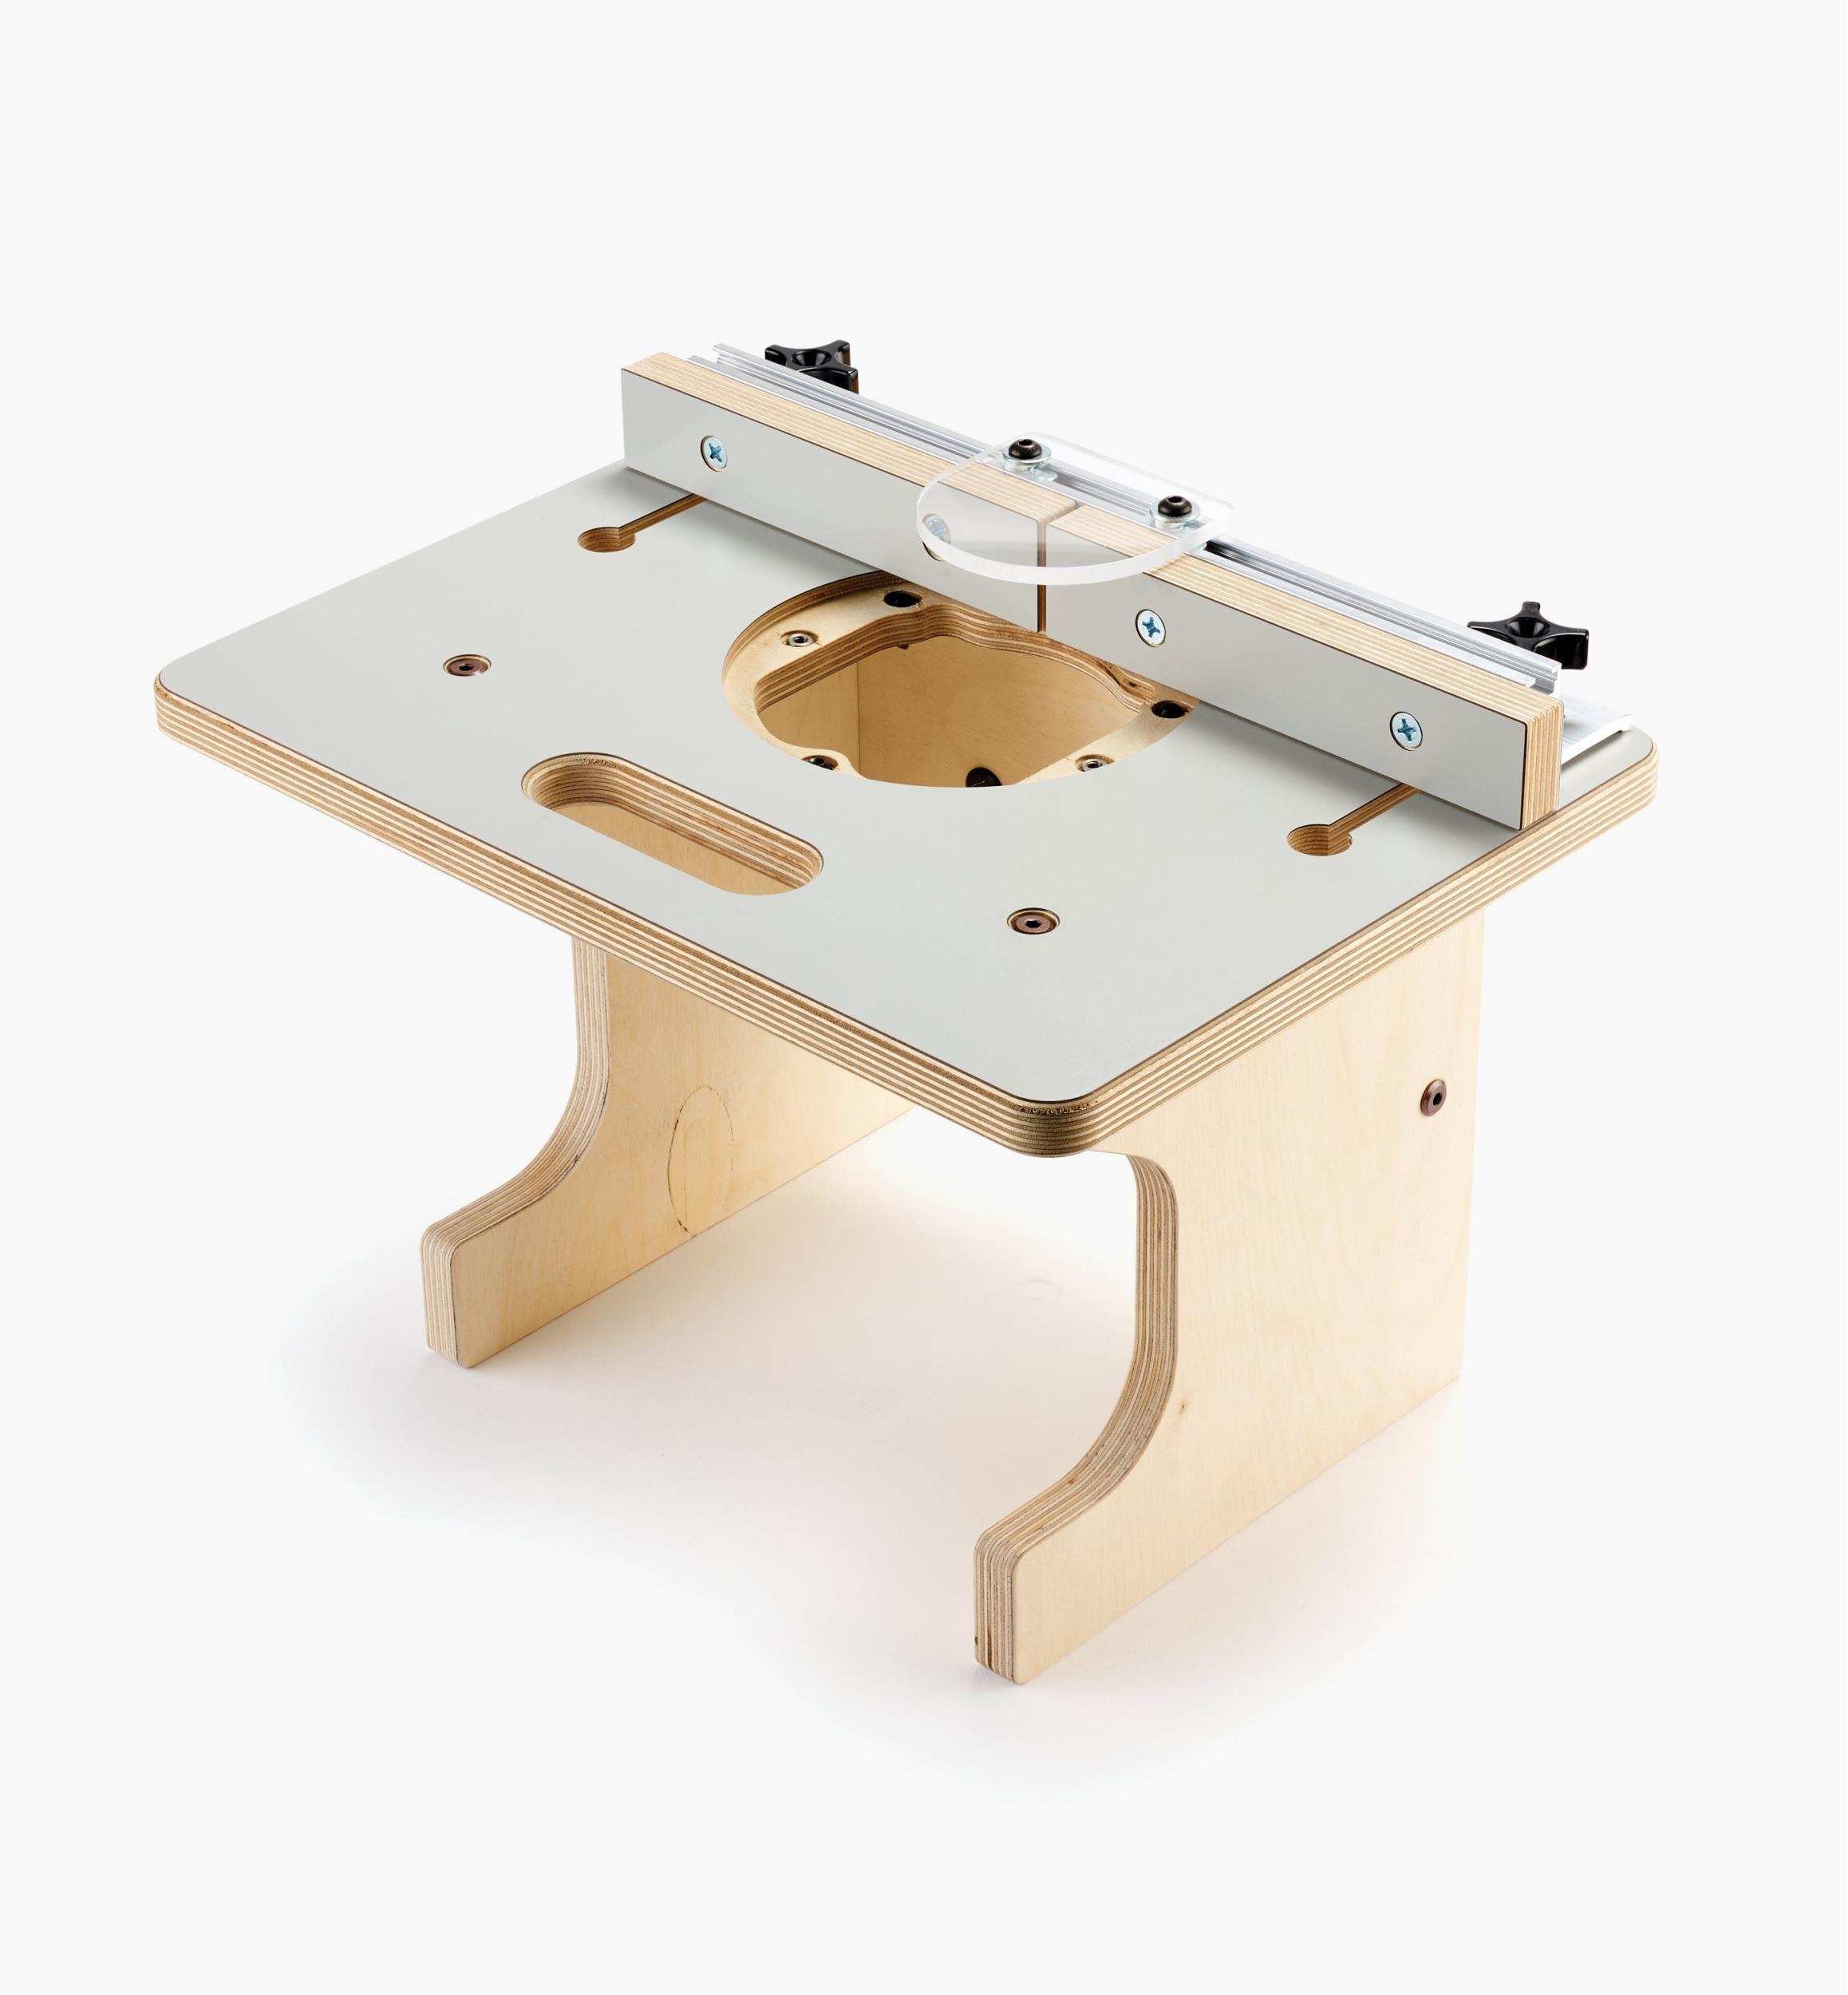 Hypocrite melody defeat Veritas Table for Compact Routers - Lee Valley Tools